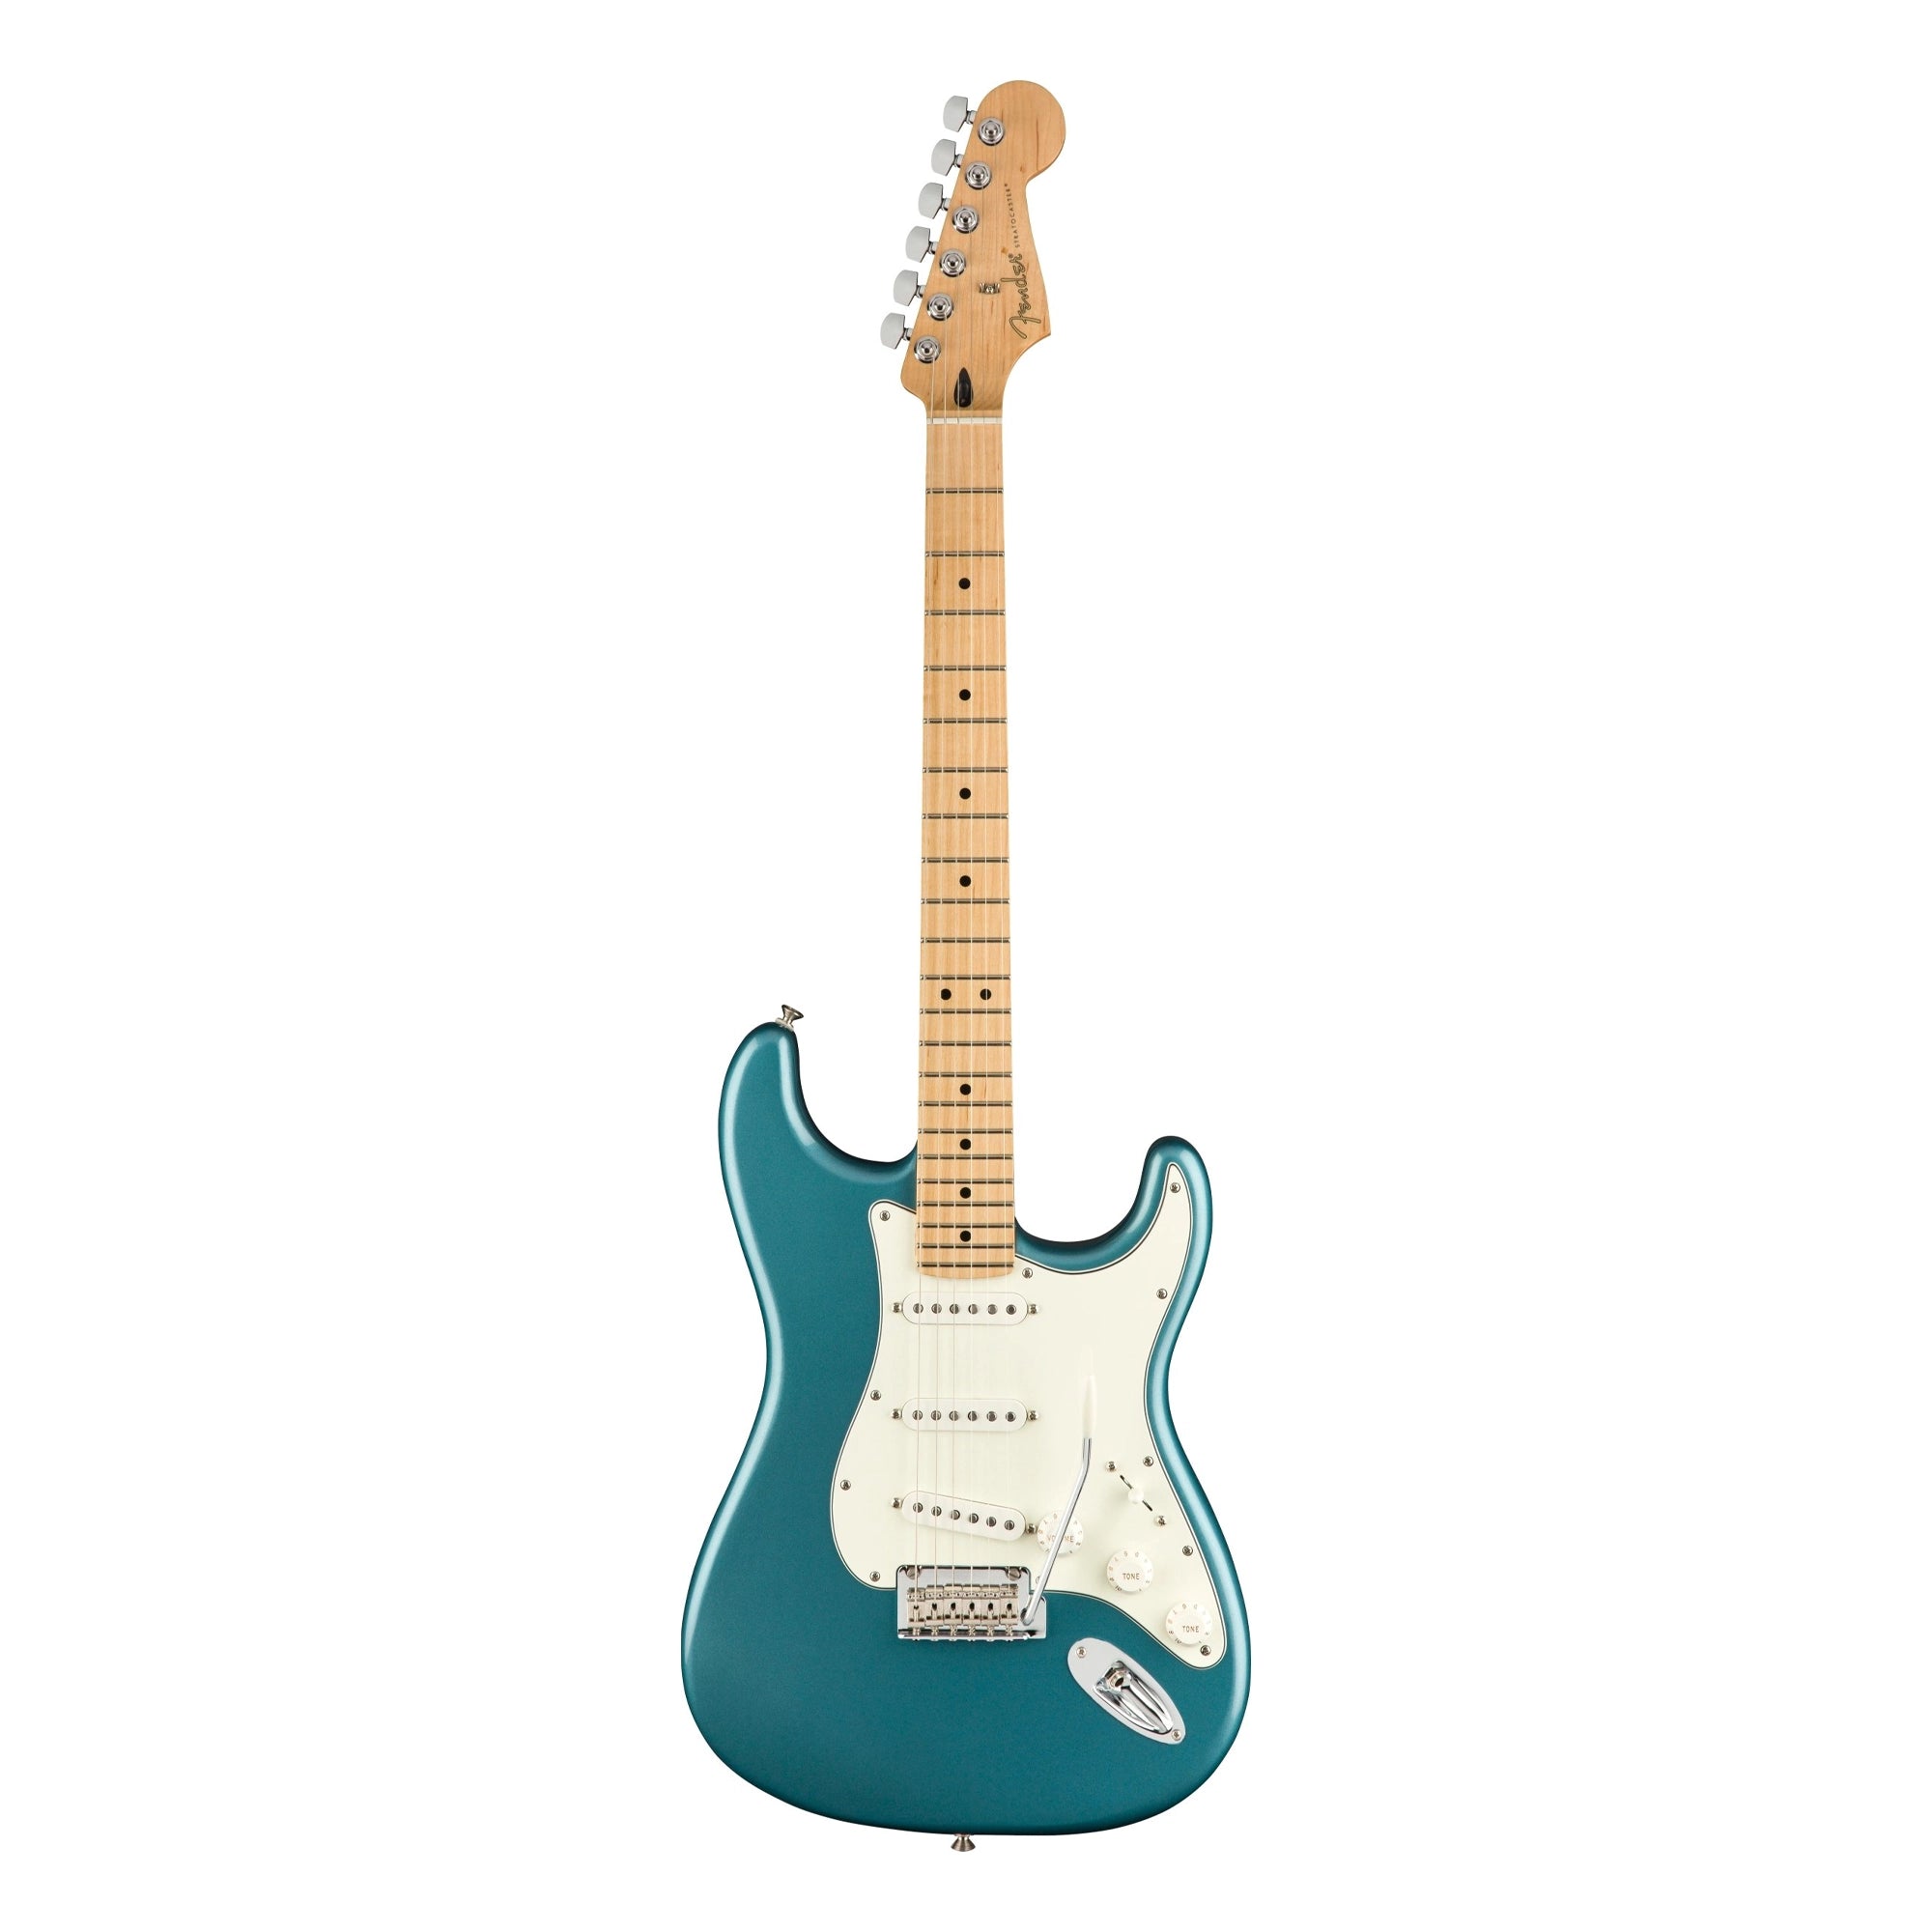 Fender Player Stratocaster Maple Fingerboard Electric Guitar - Tidepool